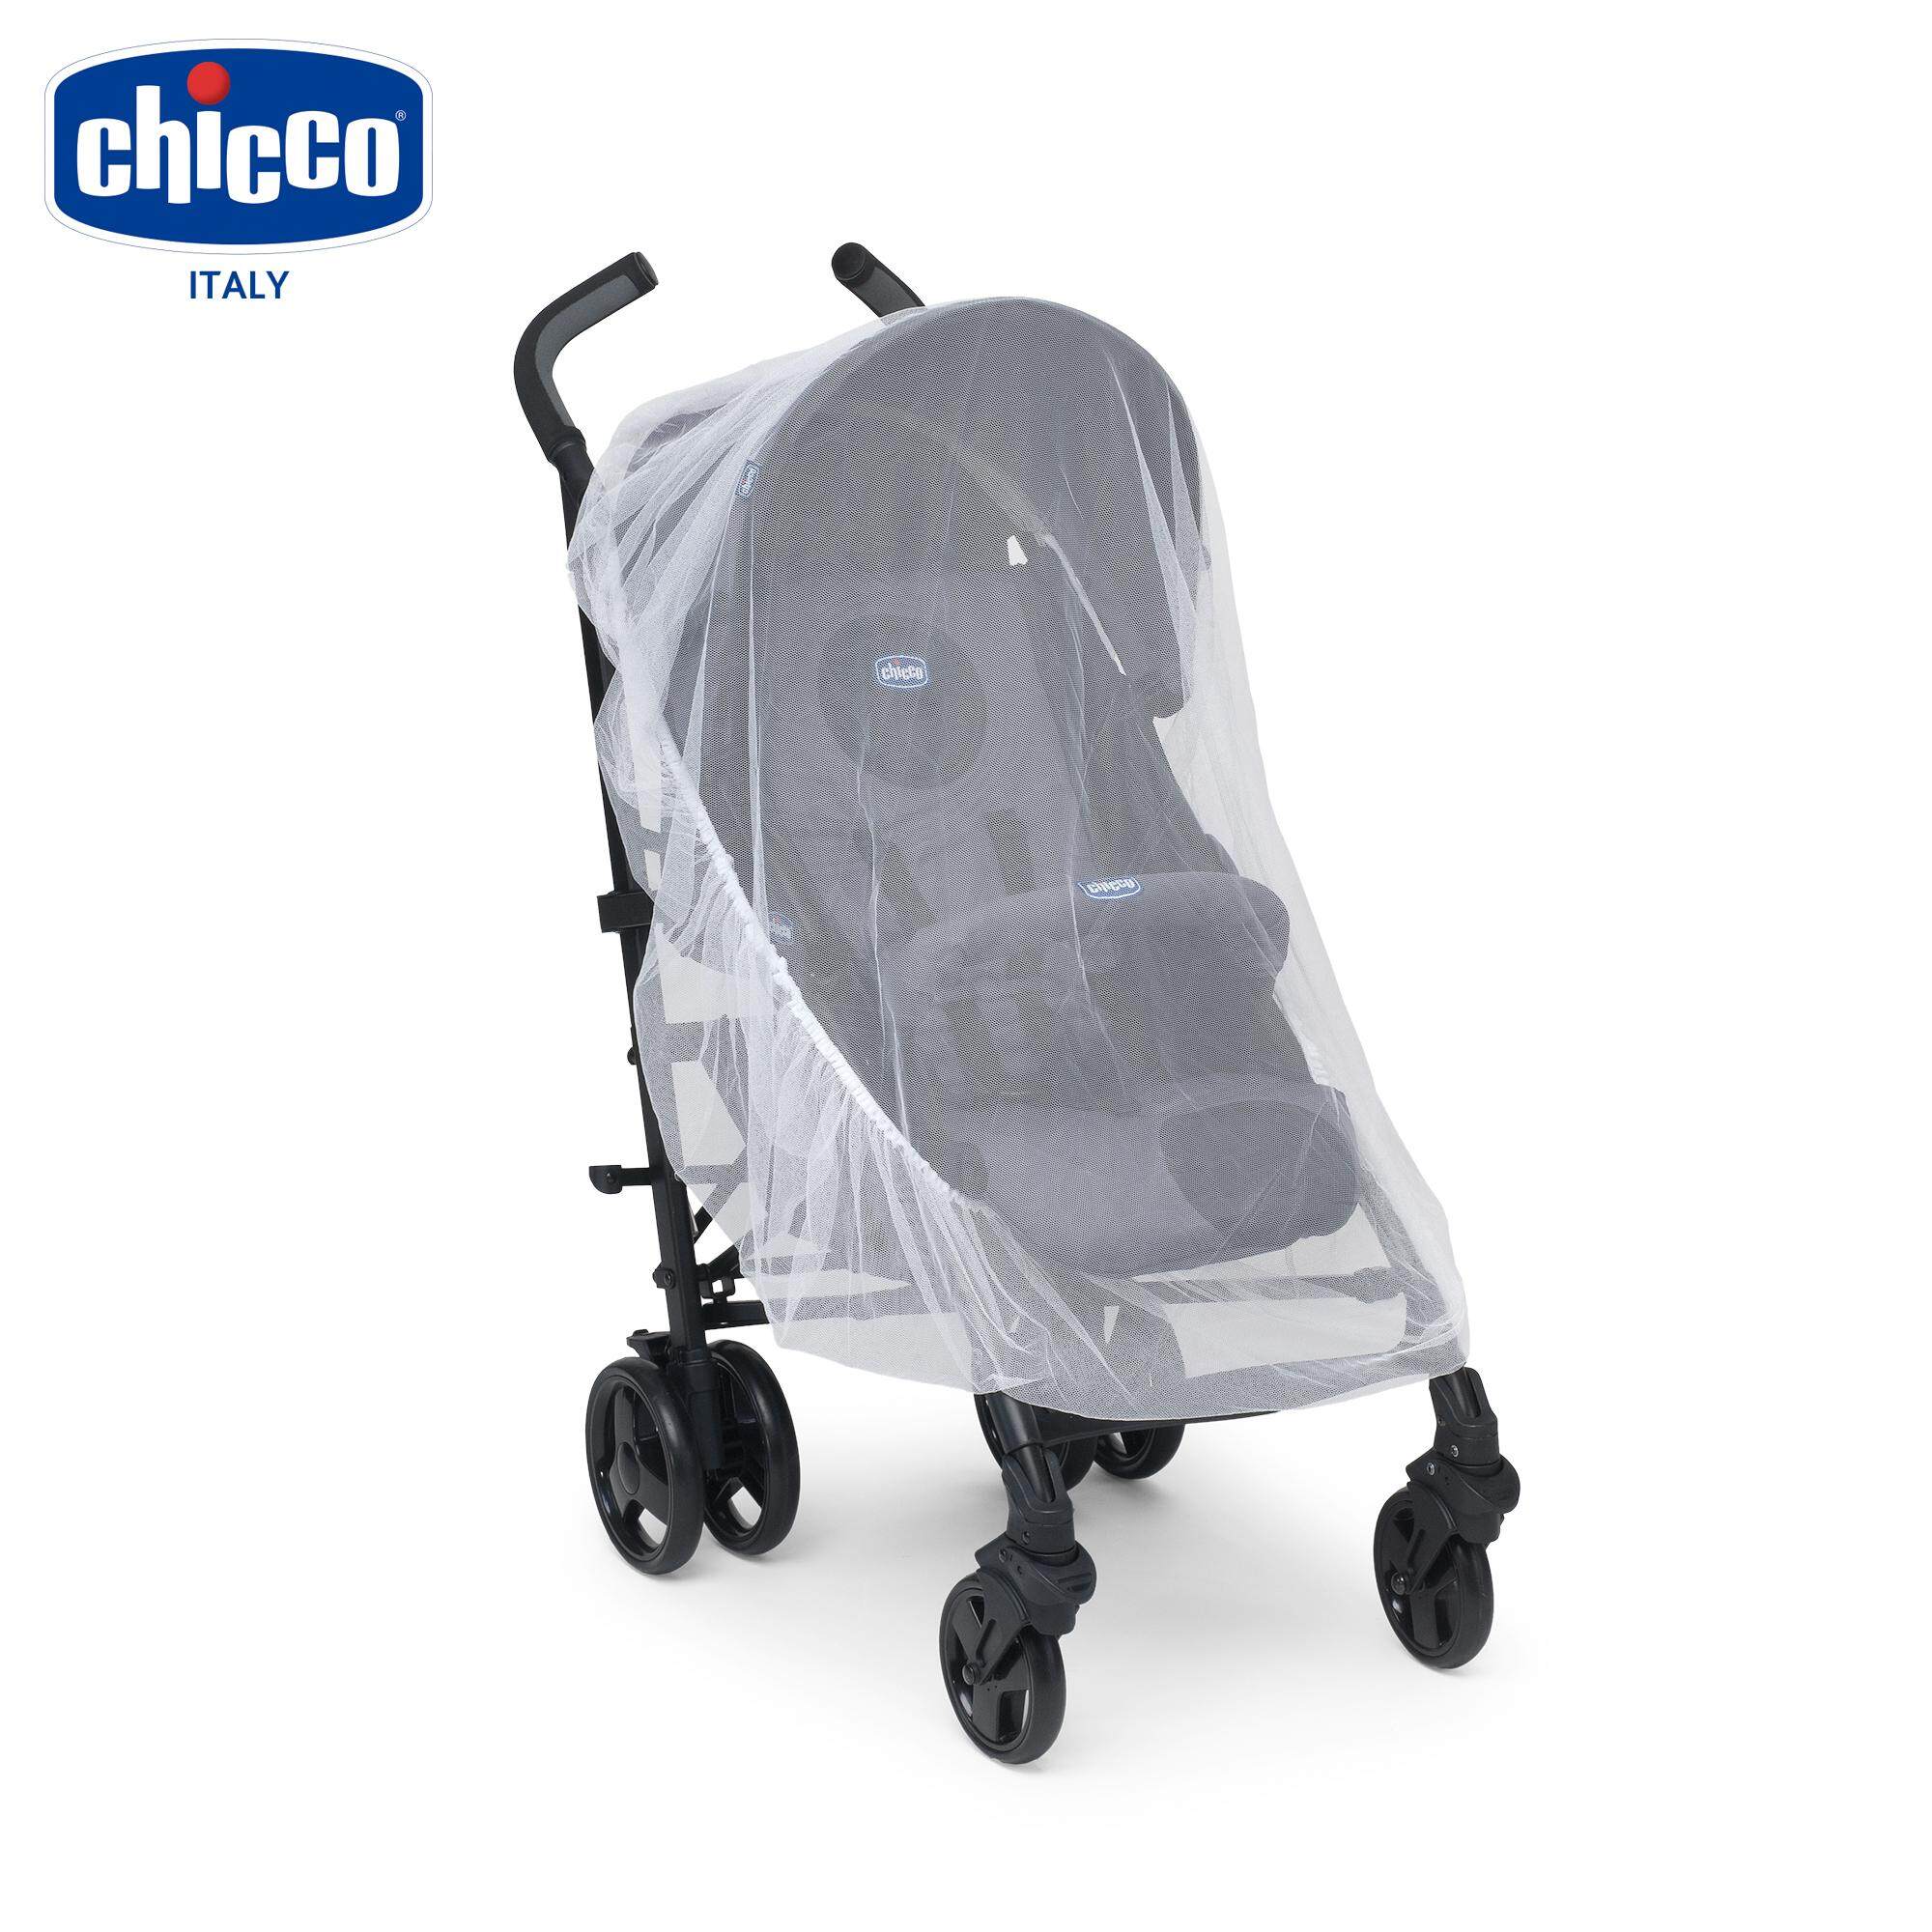 Chicco Stroller Mosquito Net